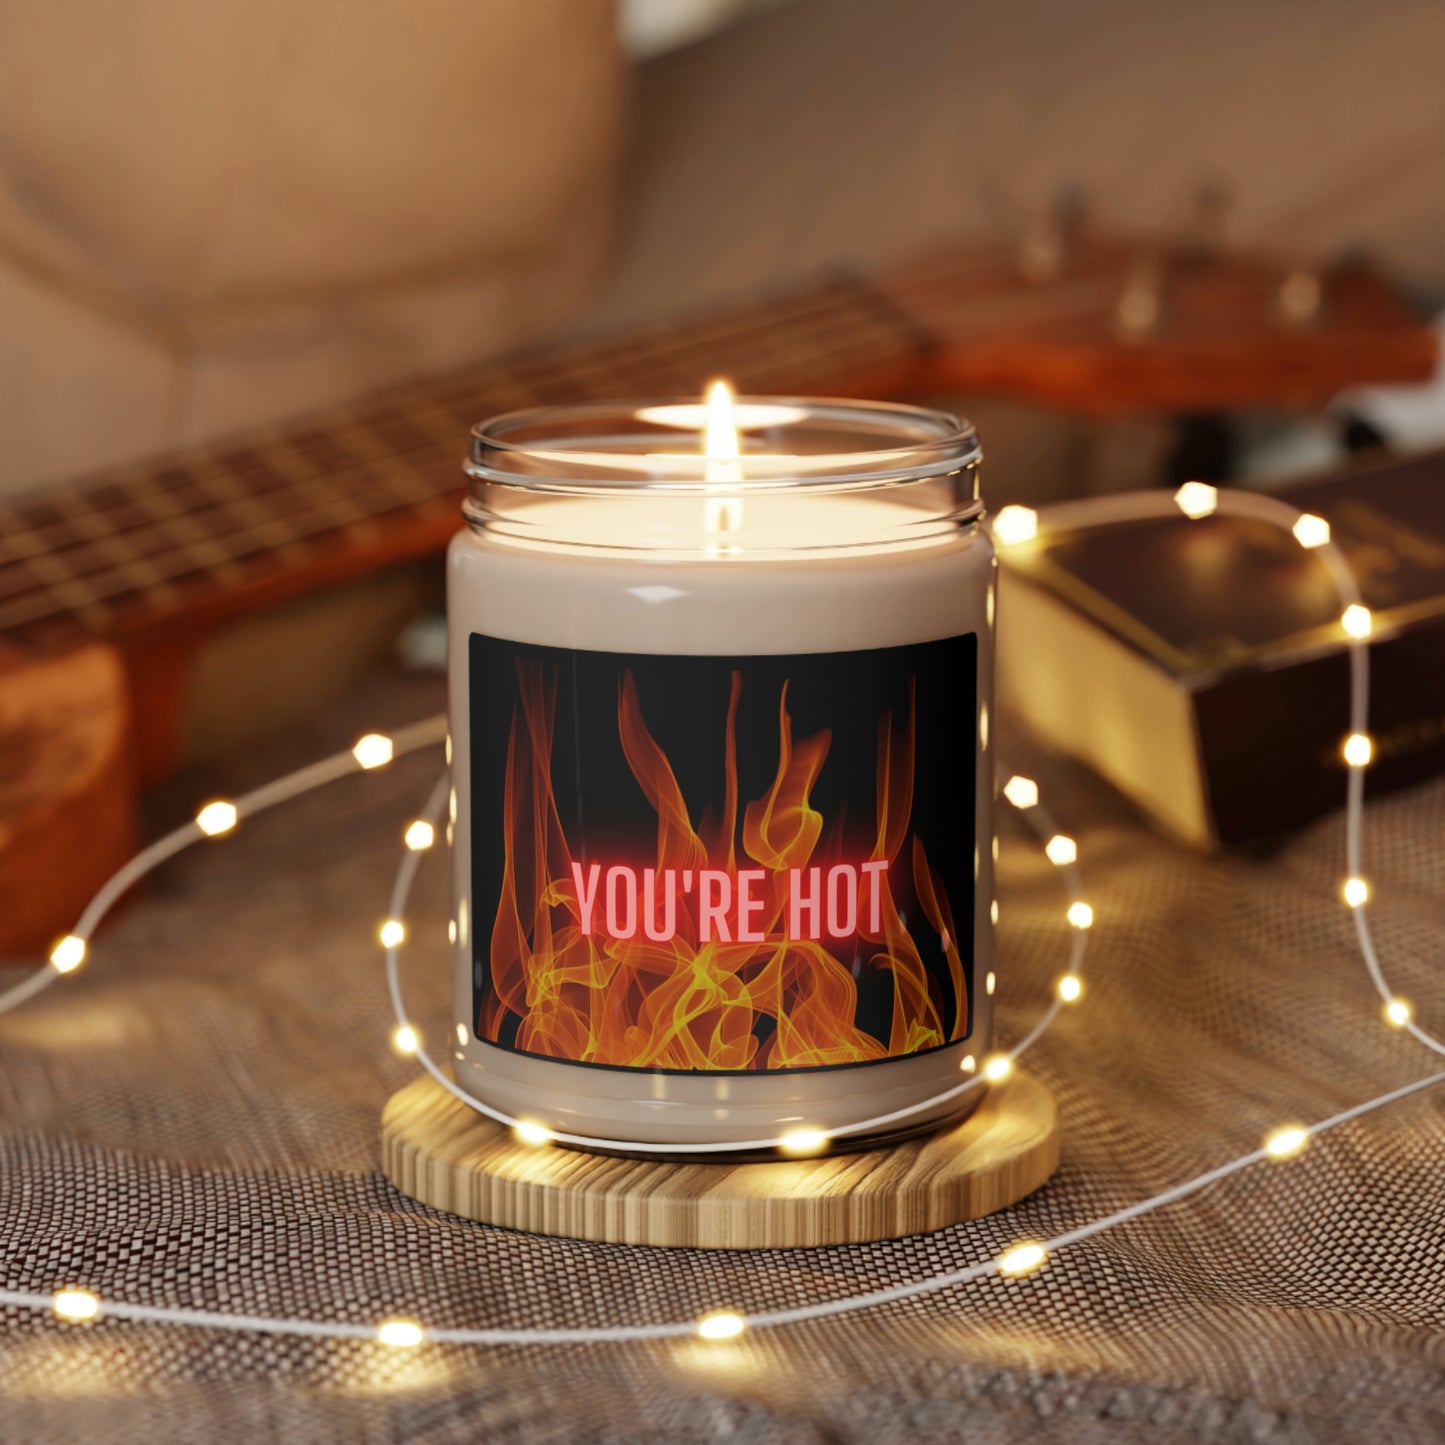 You're Hot, Scented Soy Candle, 9oz, Candle Pun, Valentines Day Gift